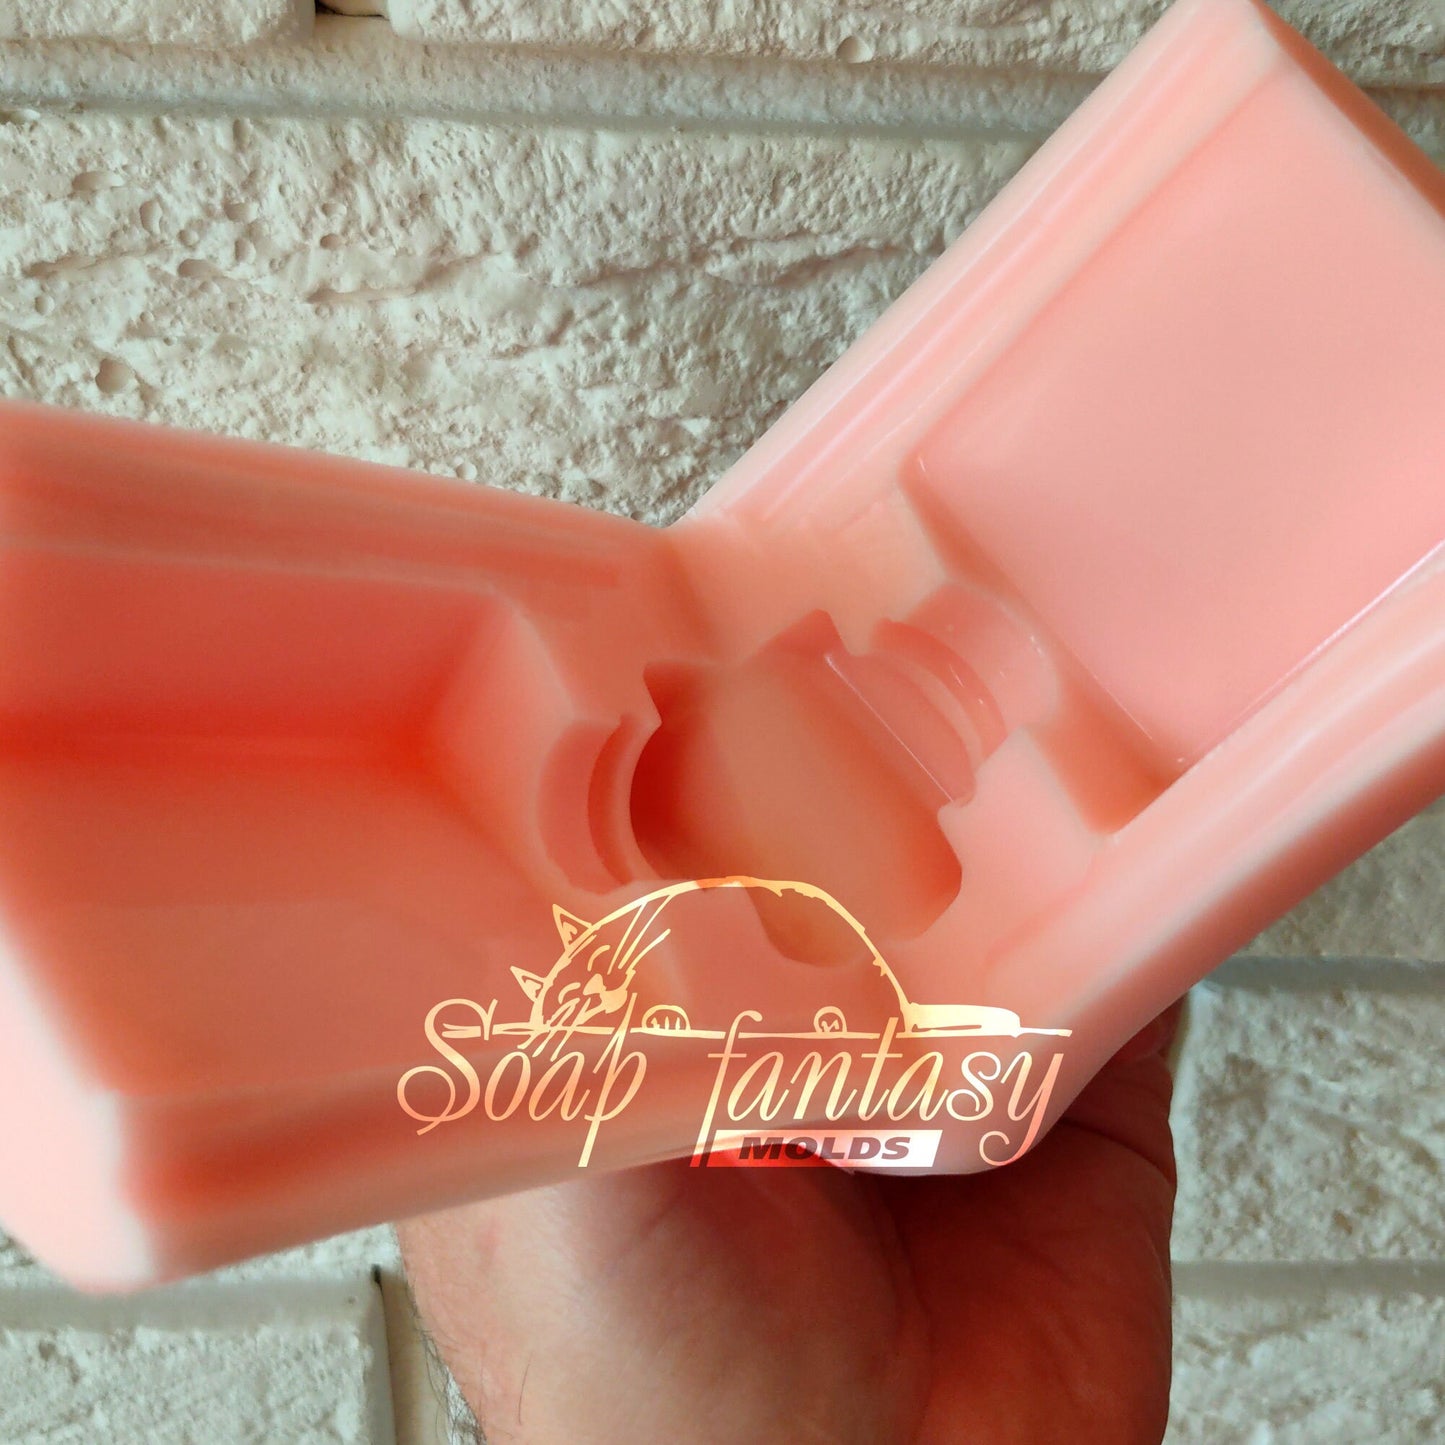 Women's perfume silicone mold for soap making